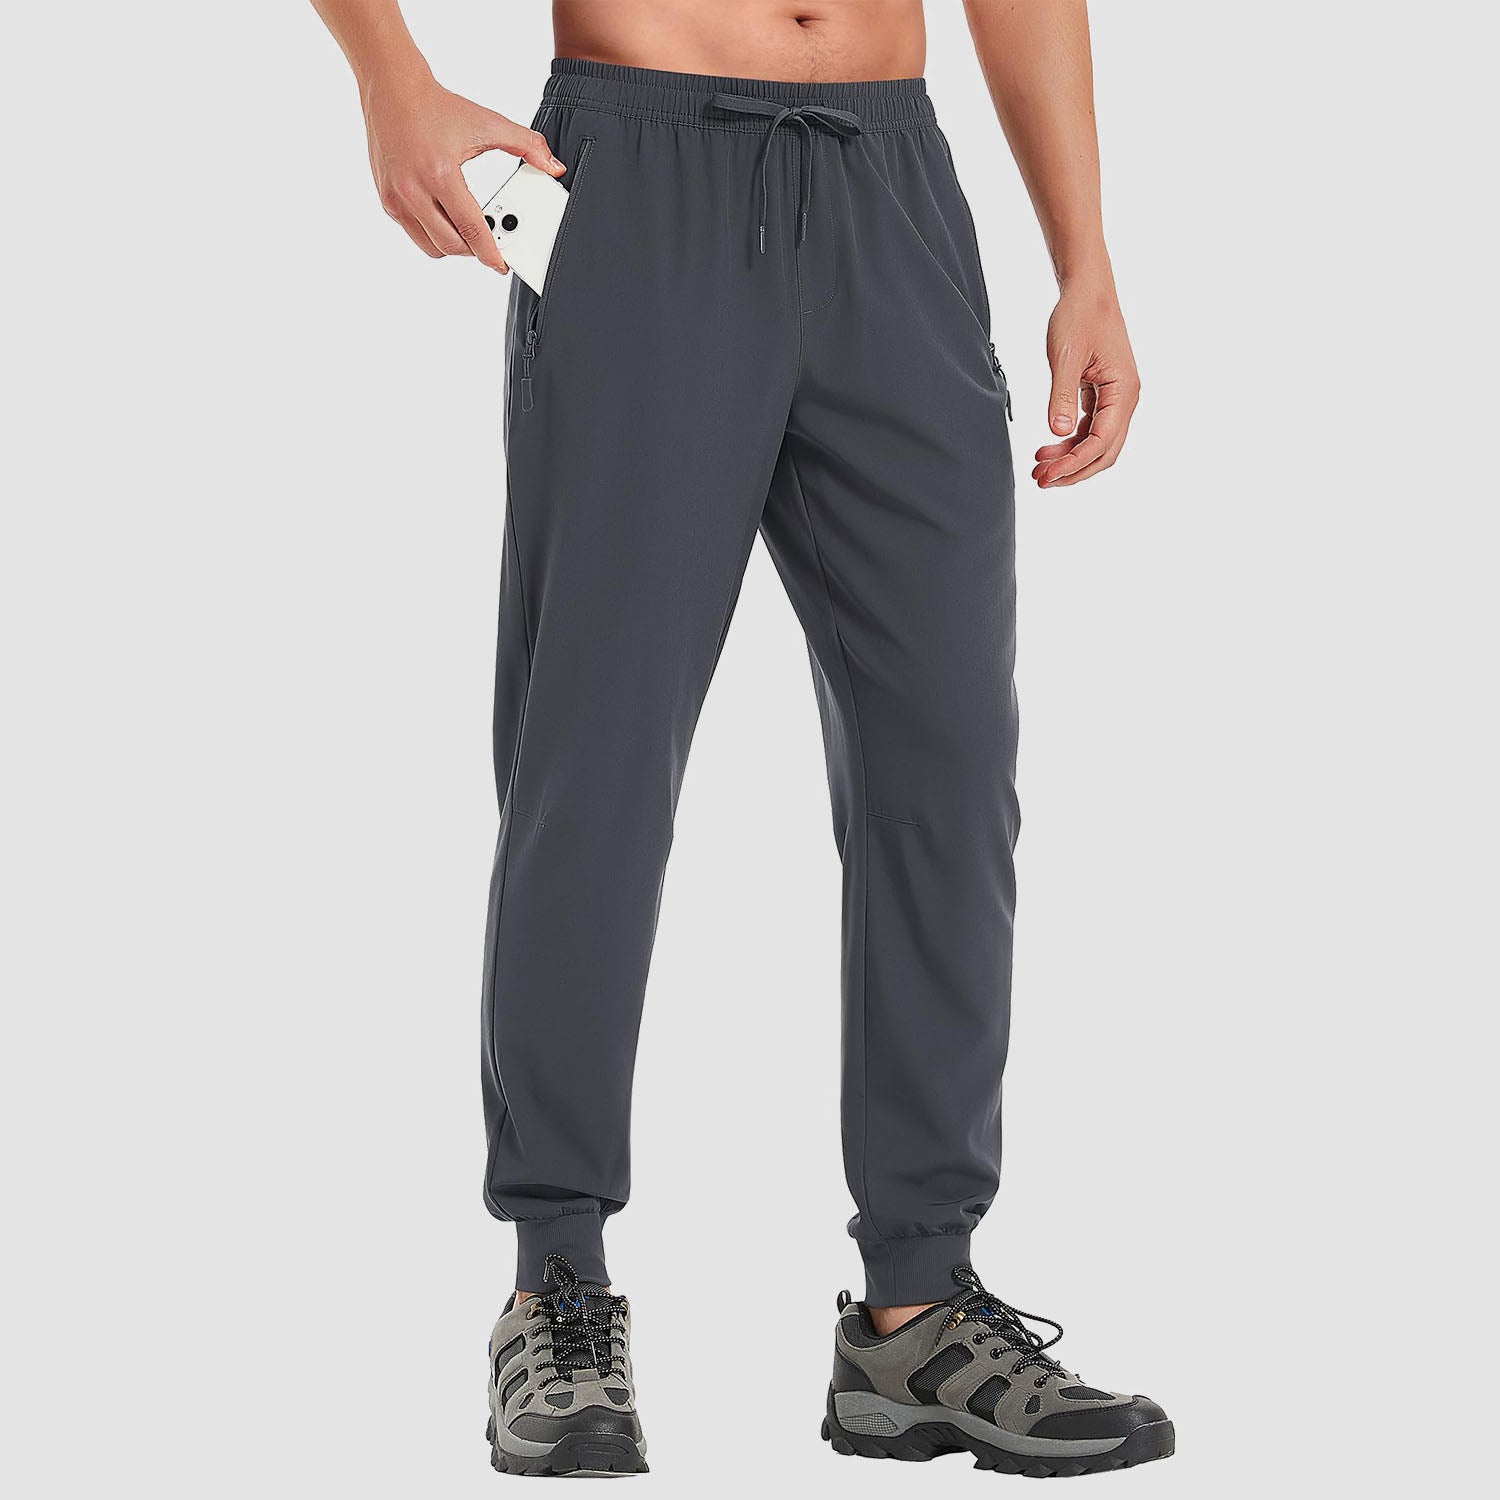 Men's Sweatpants Lightweight Quick Dry Workout Trousers